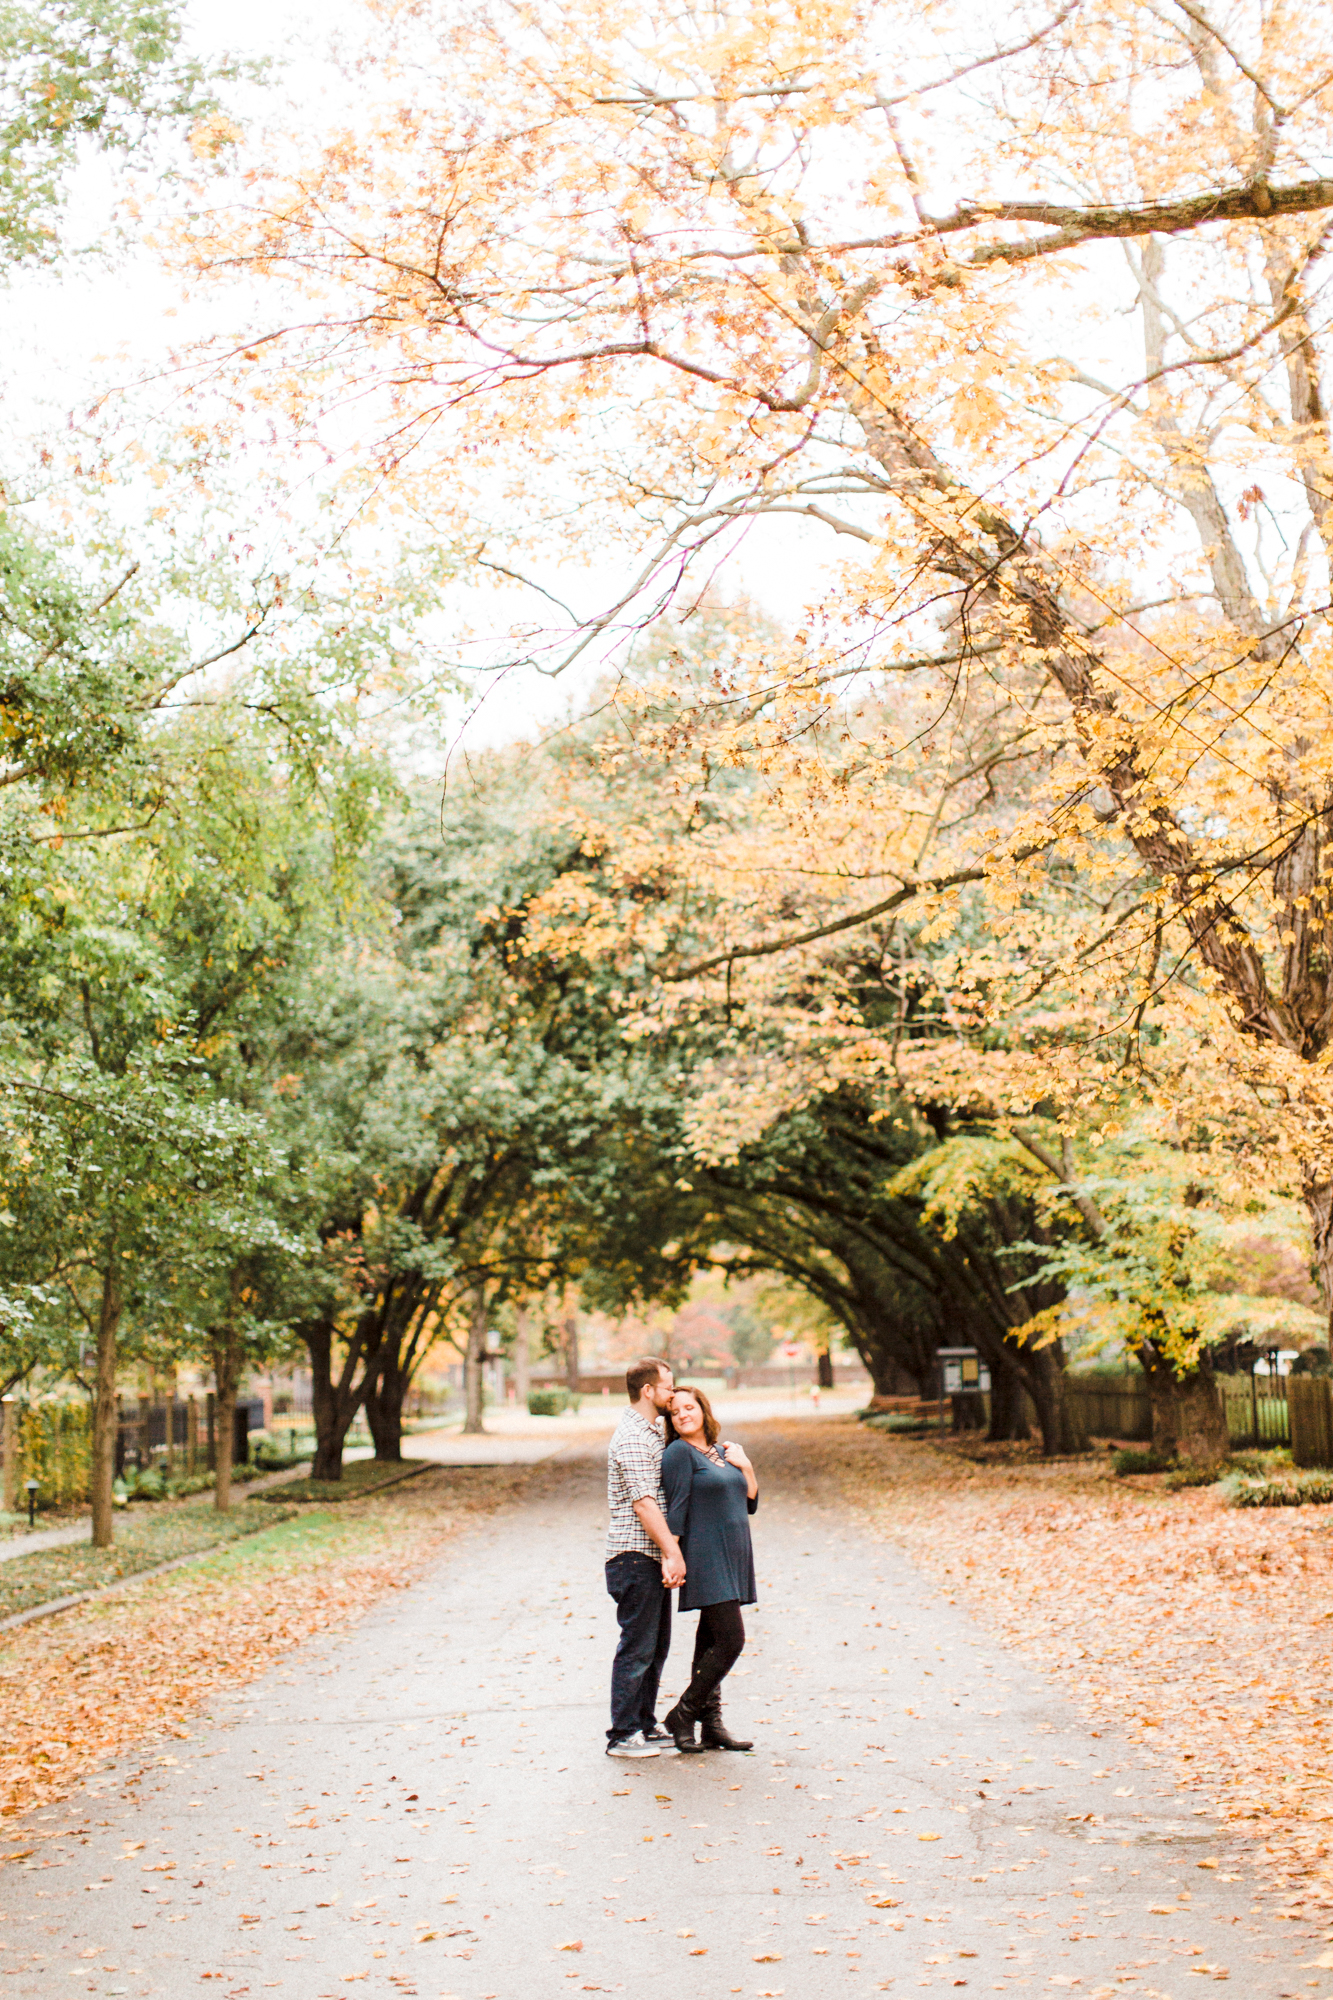 Courtney and Scott's Fall Engagement Session in New Harmony. Photographed by Morgan Williams Photography.